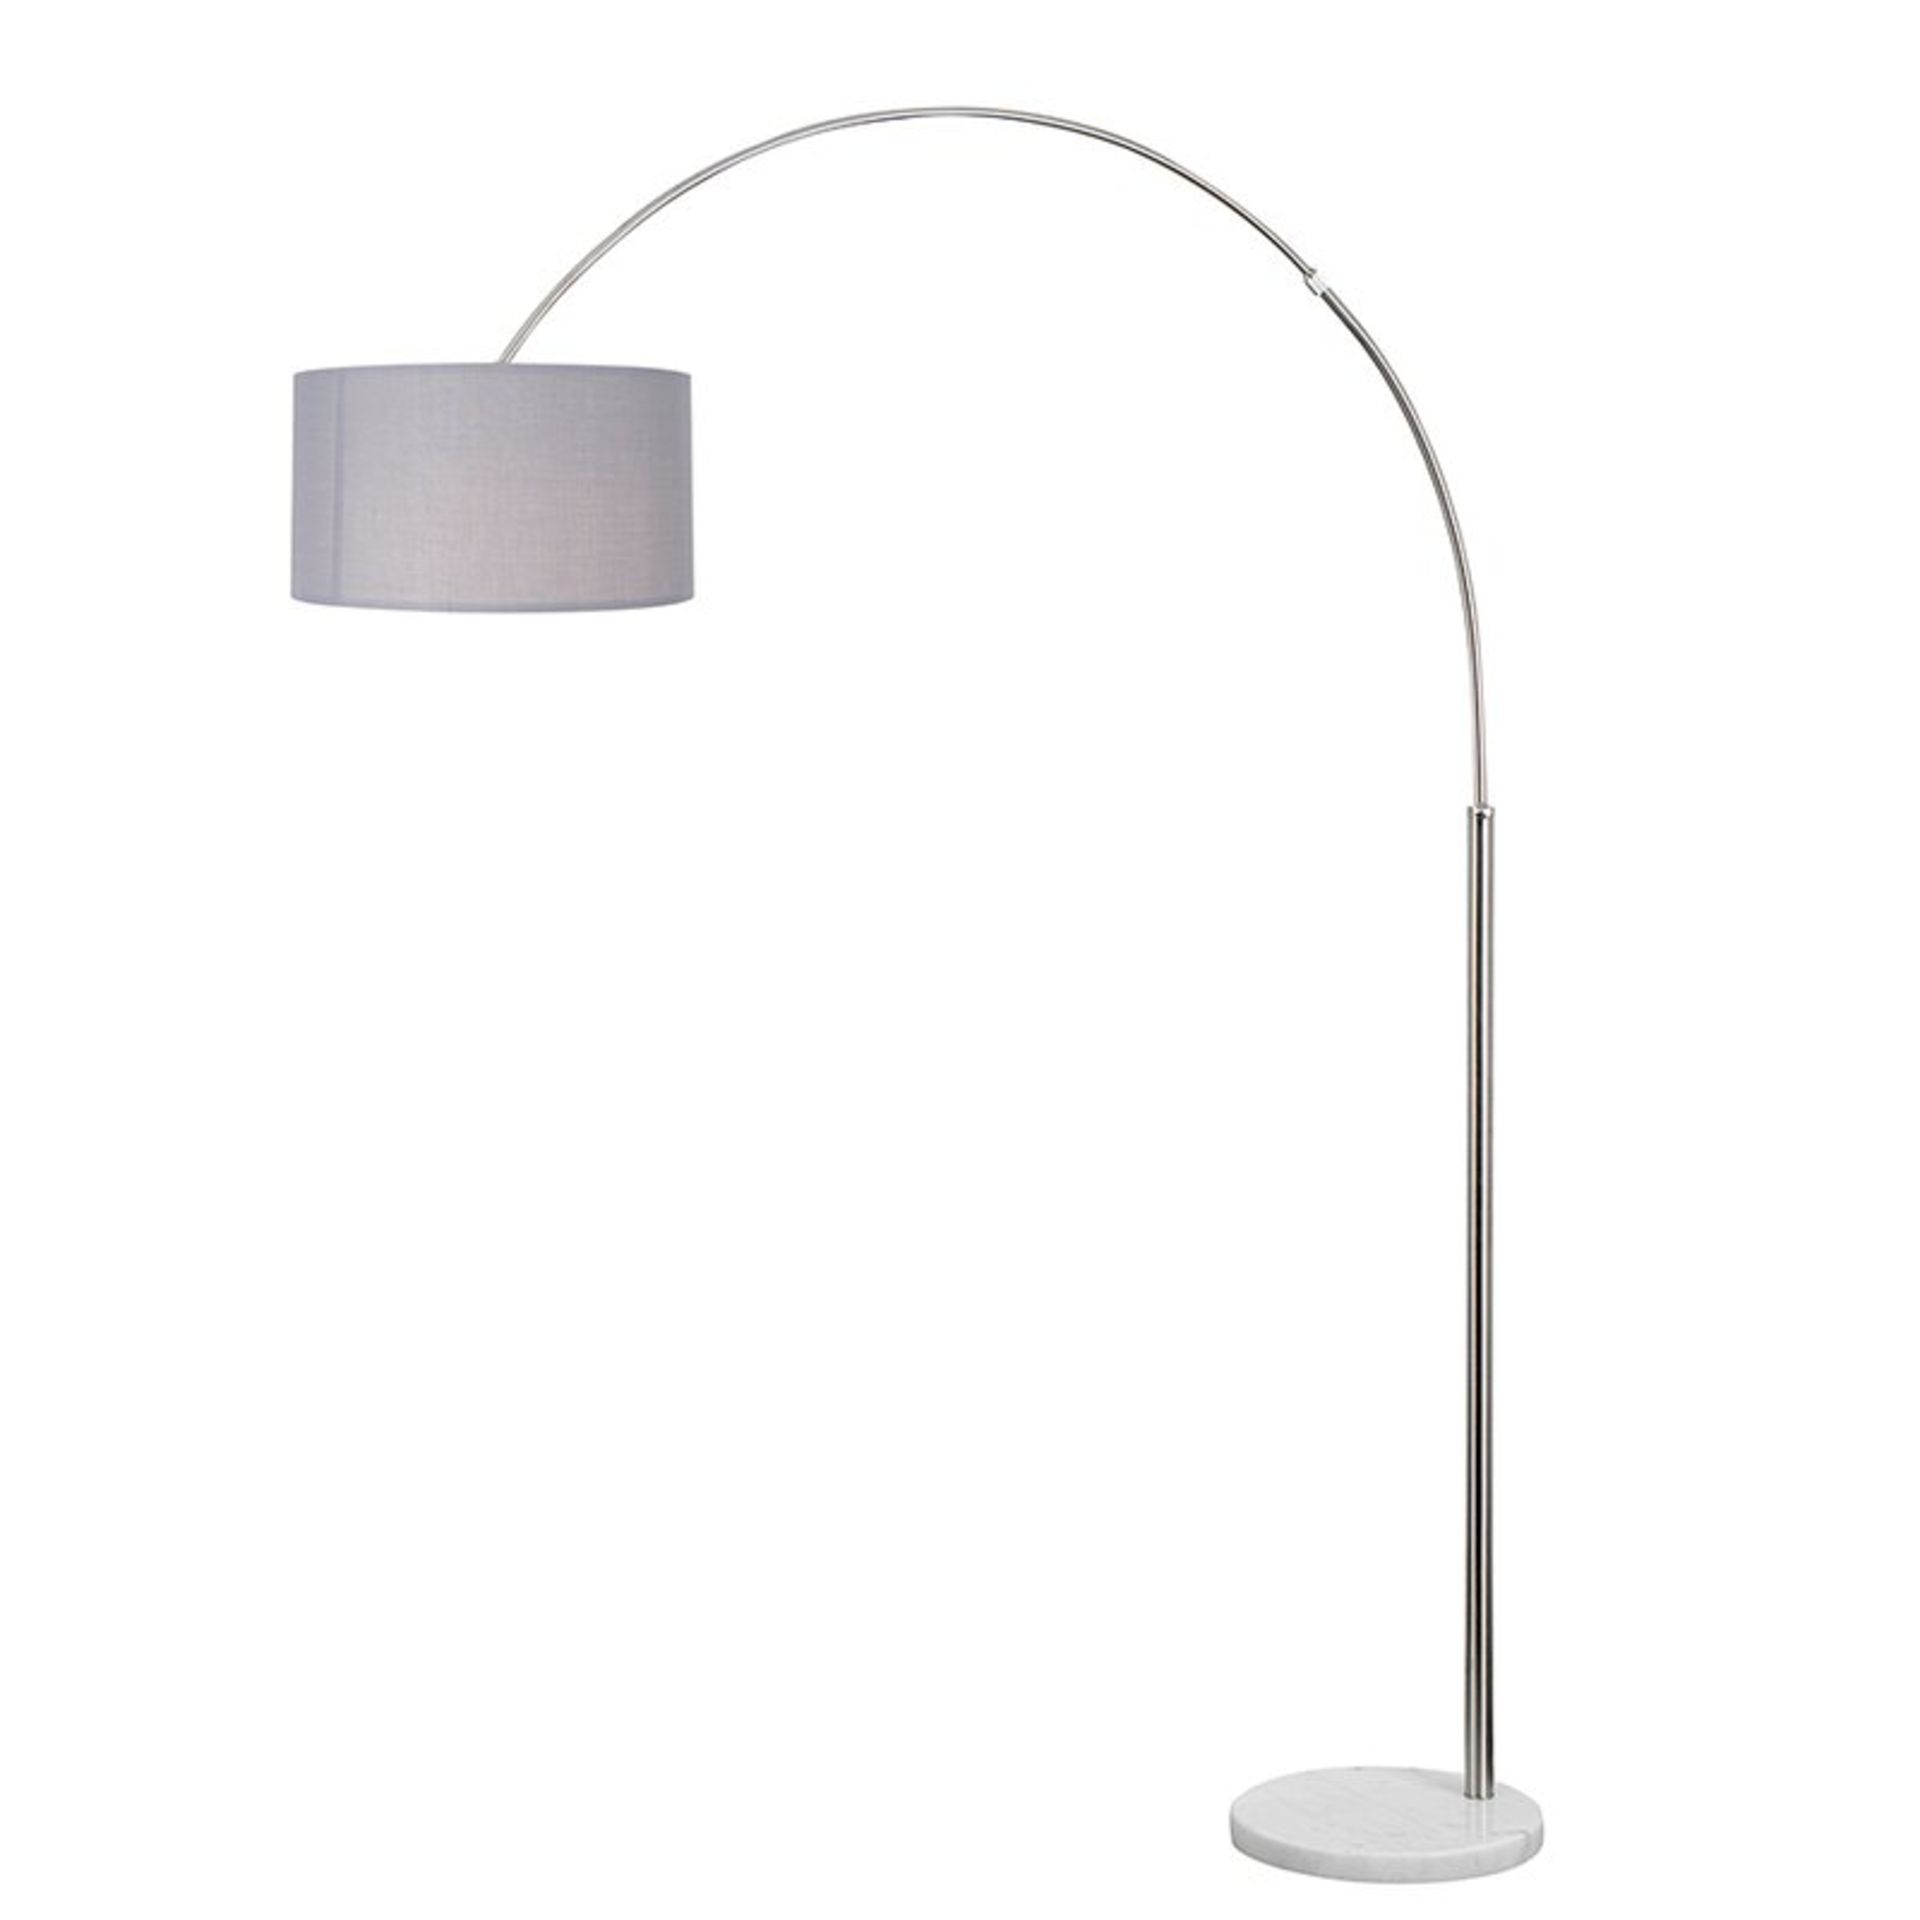 Derosier 200cm Arched Floor Lamp NO LAMP SHADE - RRP £169.99